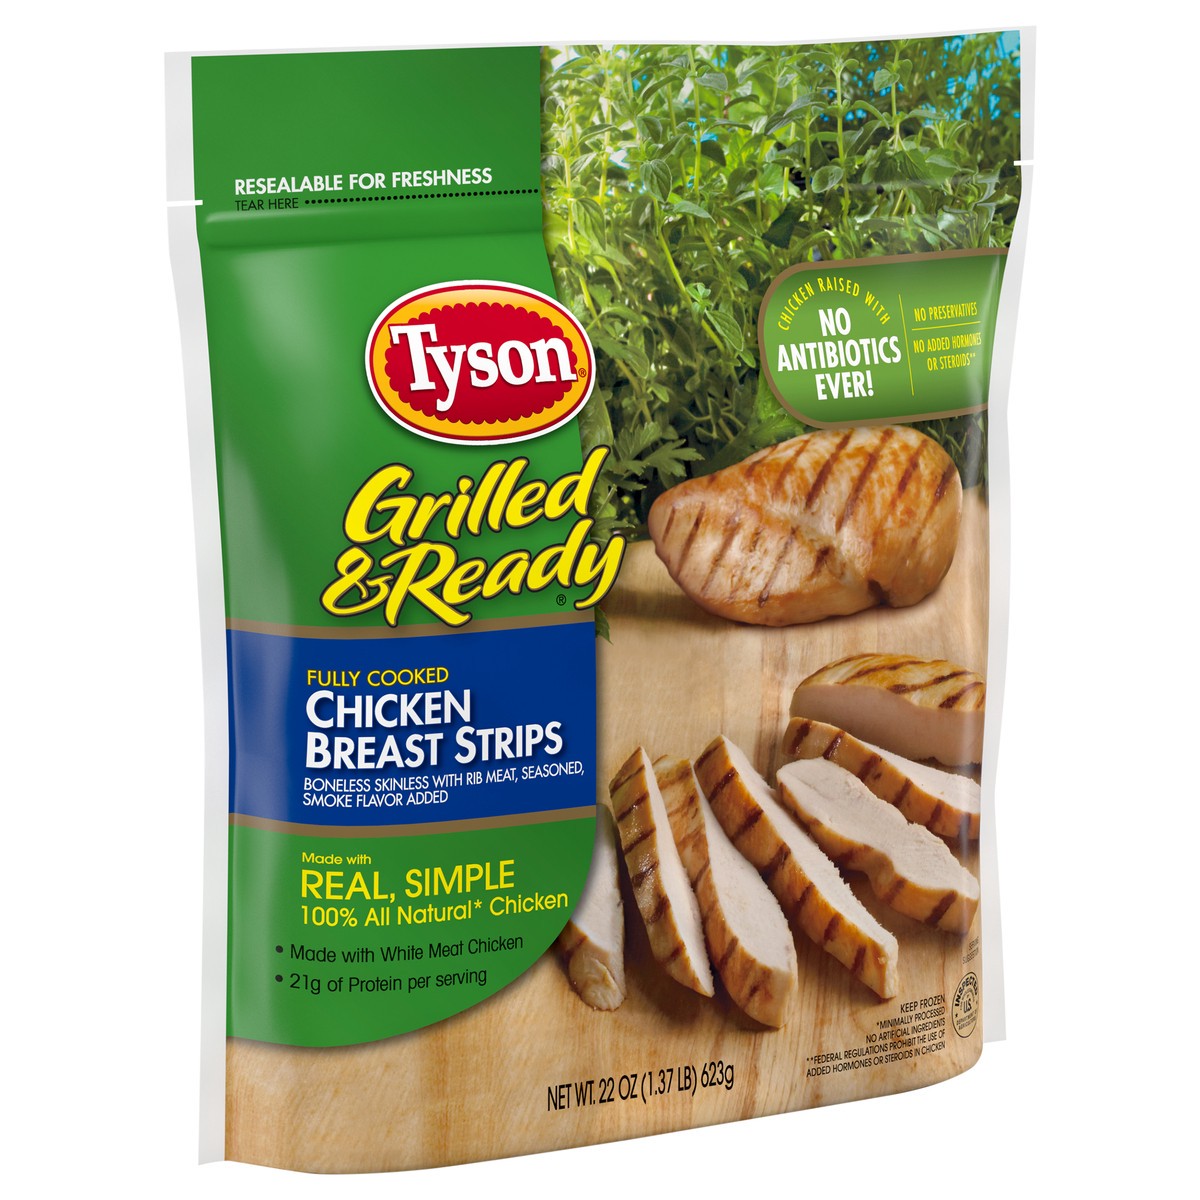 slide 3 of 10, TYSON GRILLED AND READY Tyson Grilled & Ready Fully Cooked Grilled Chicken Breast Strips, 22 oz. (Frozen), 623.69 g